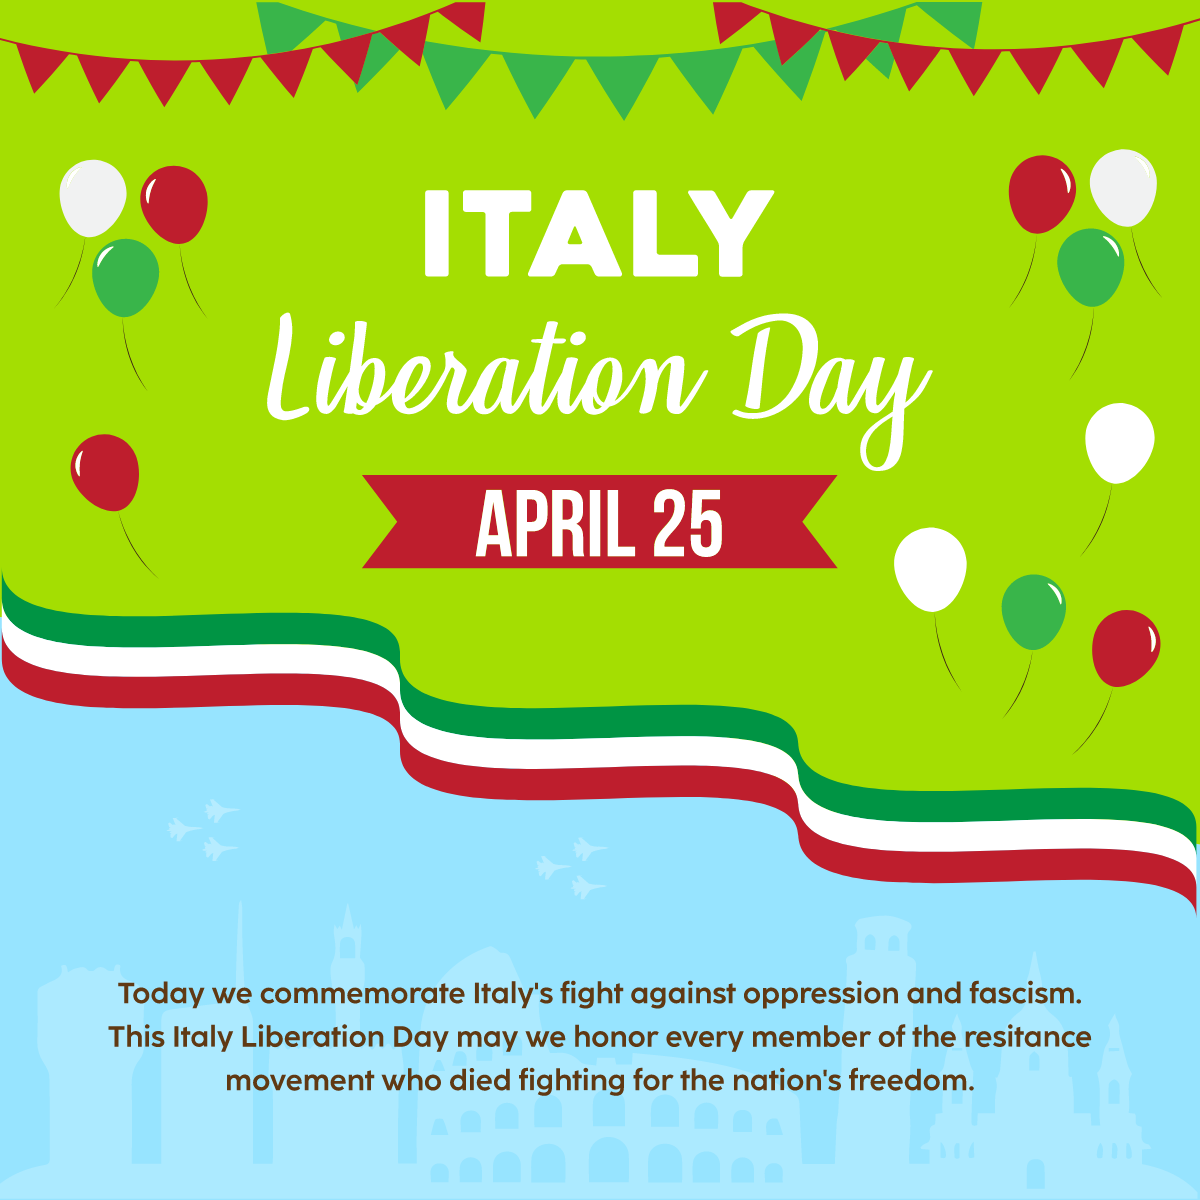 Italy Liberation Day Linkedin Post Template